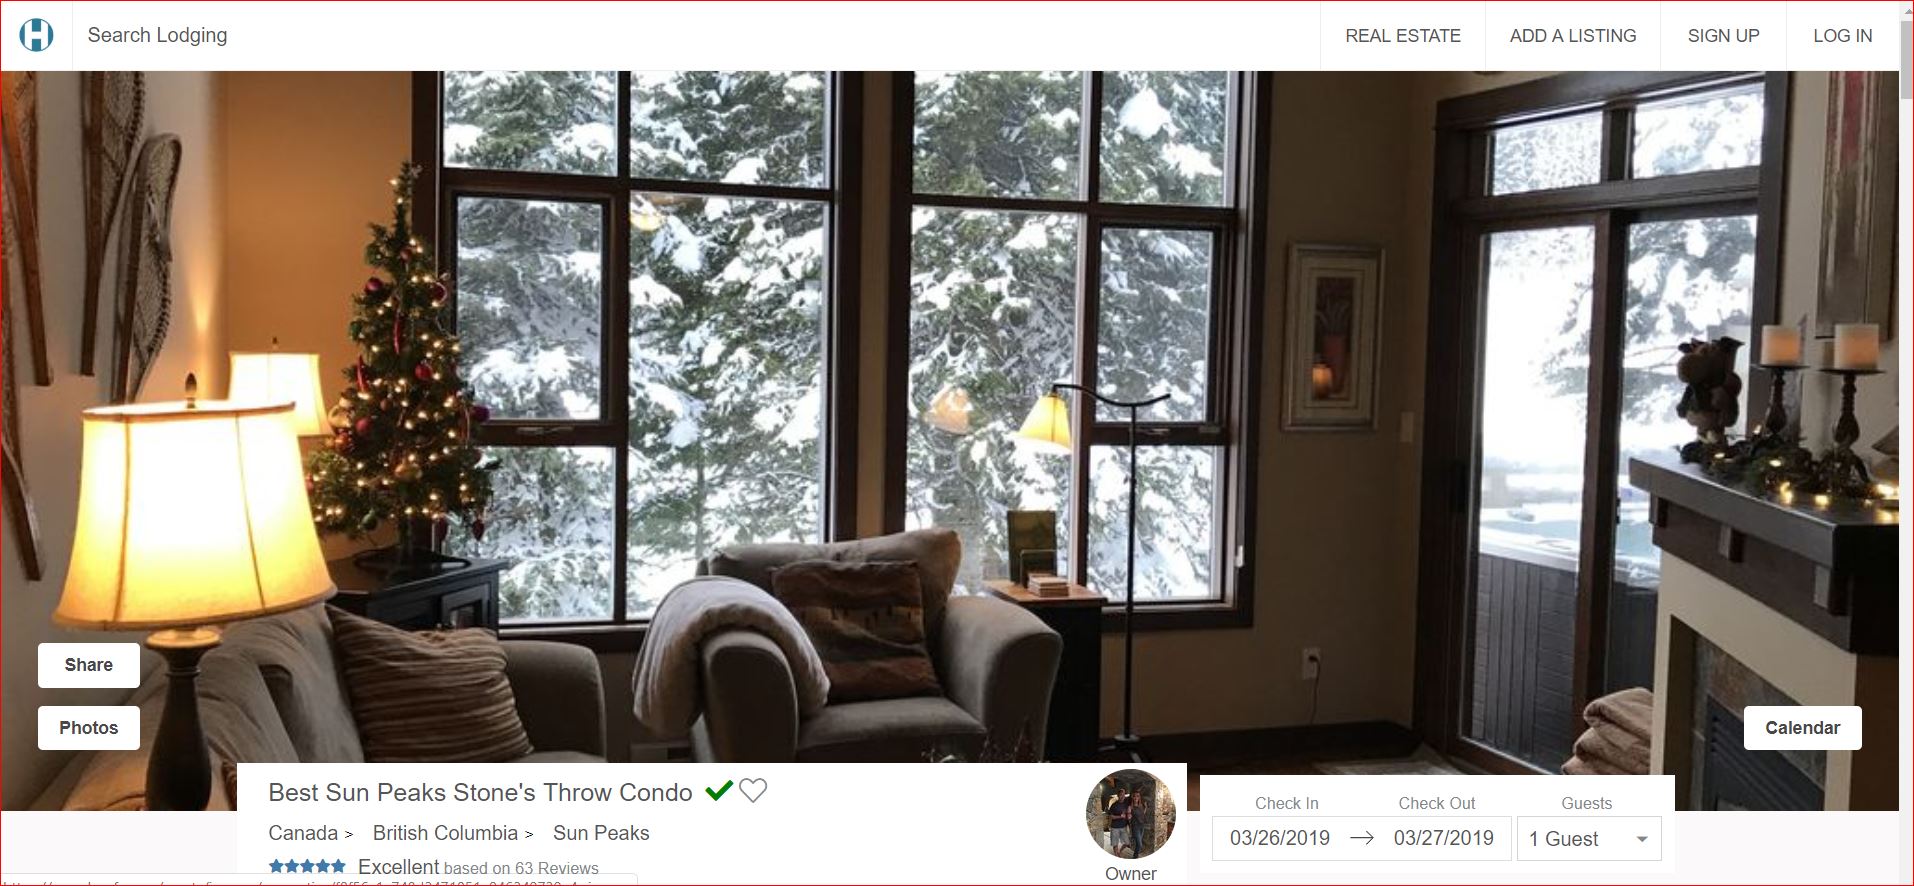 Houfy Sun Peaks Vacation Rentals, and thousands of other properties worldwide